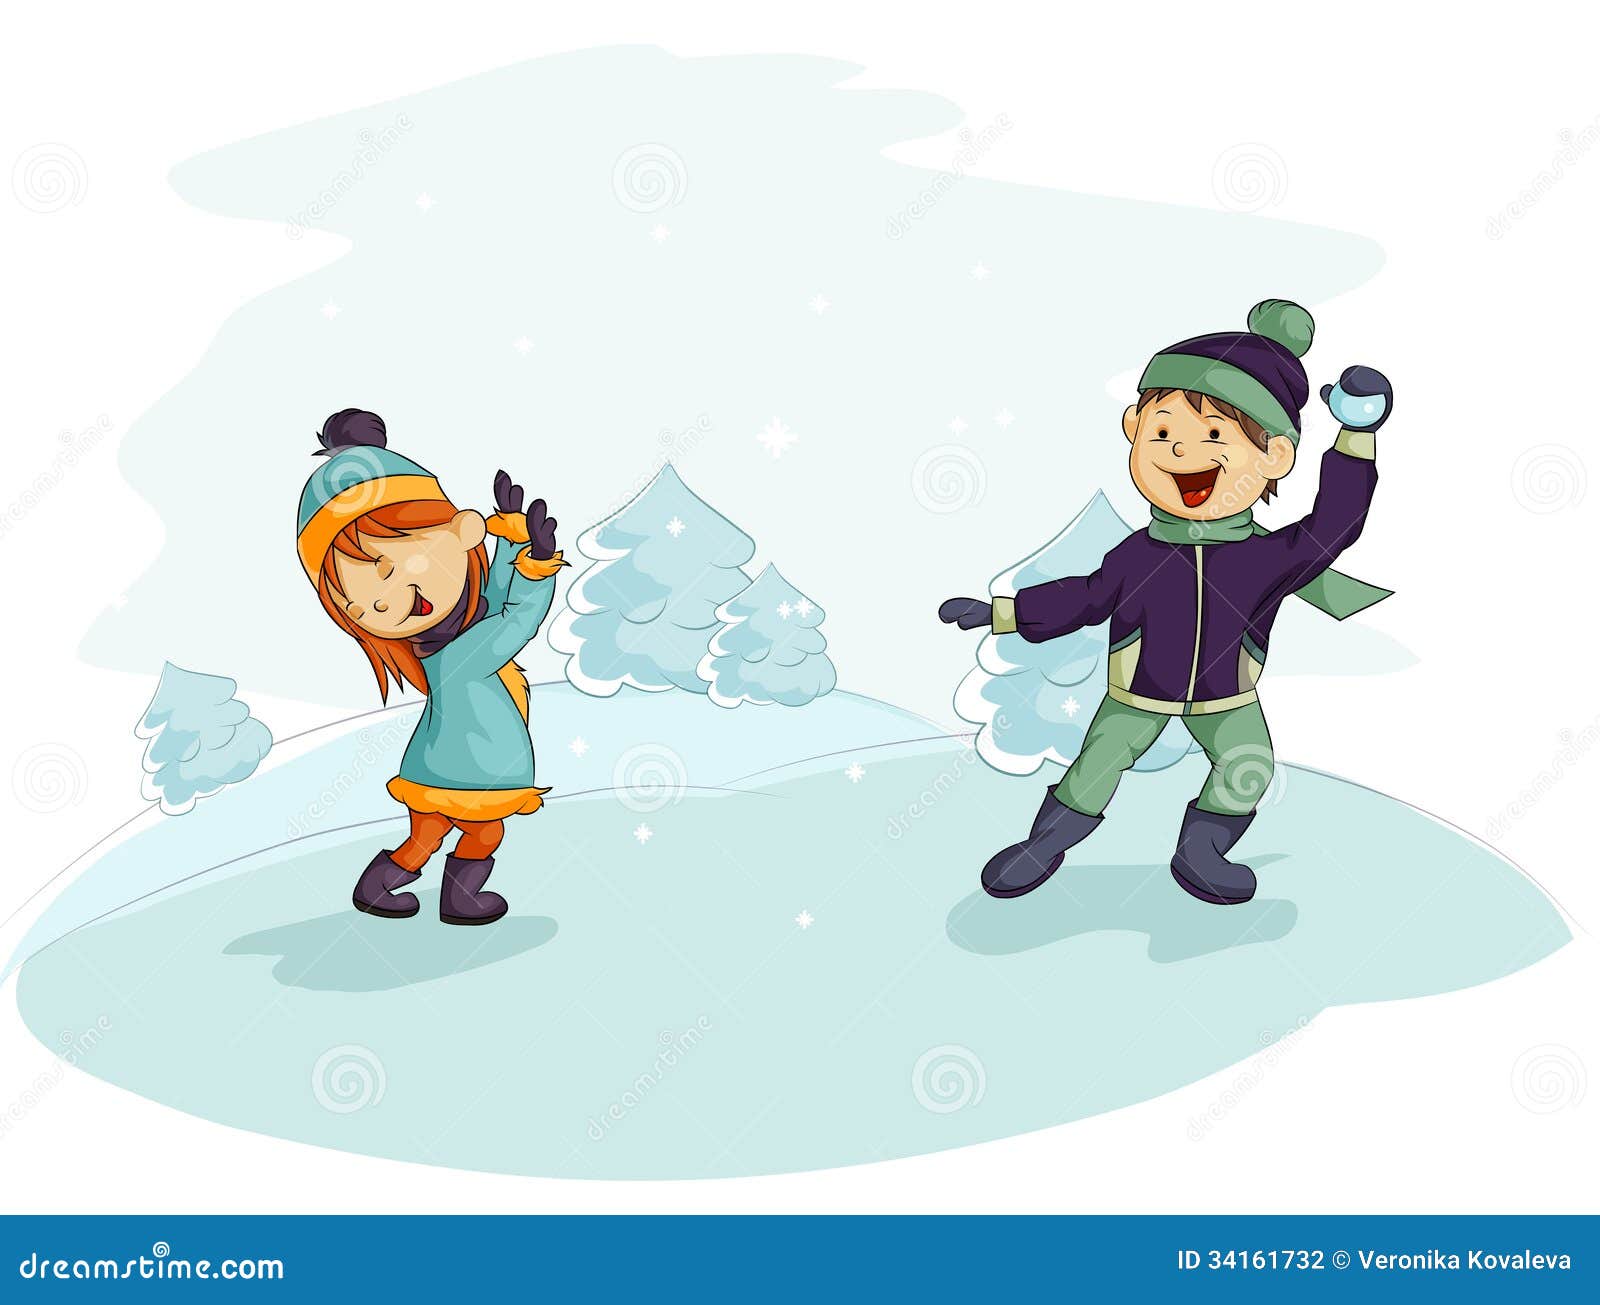 clipart snowball fight - photo #49